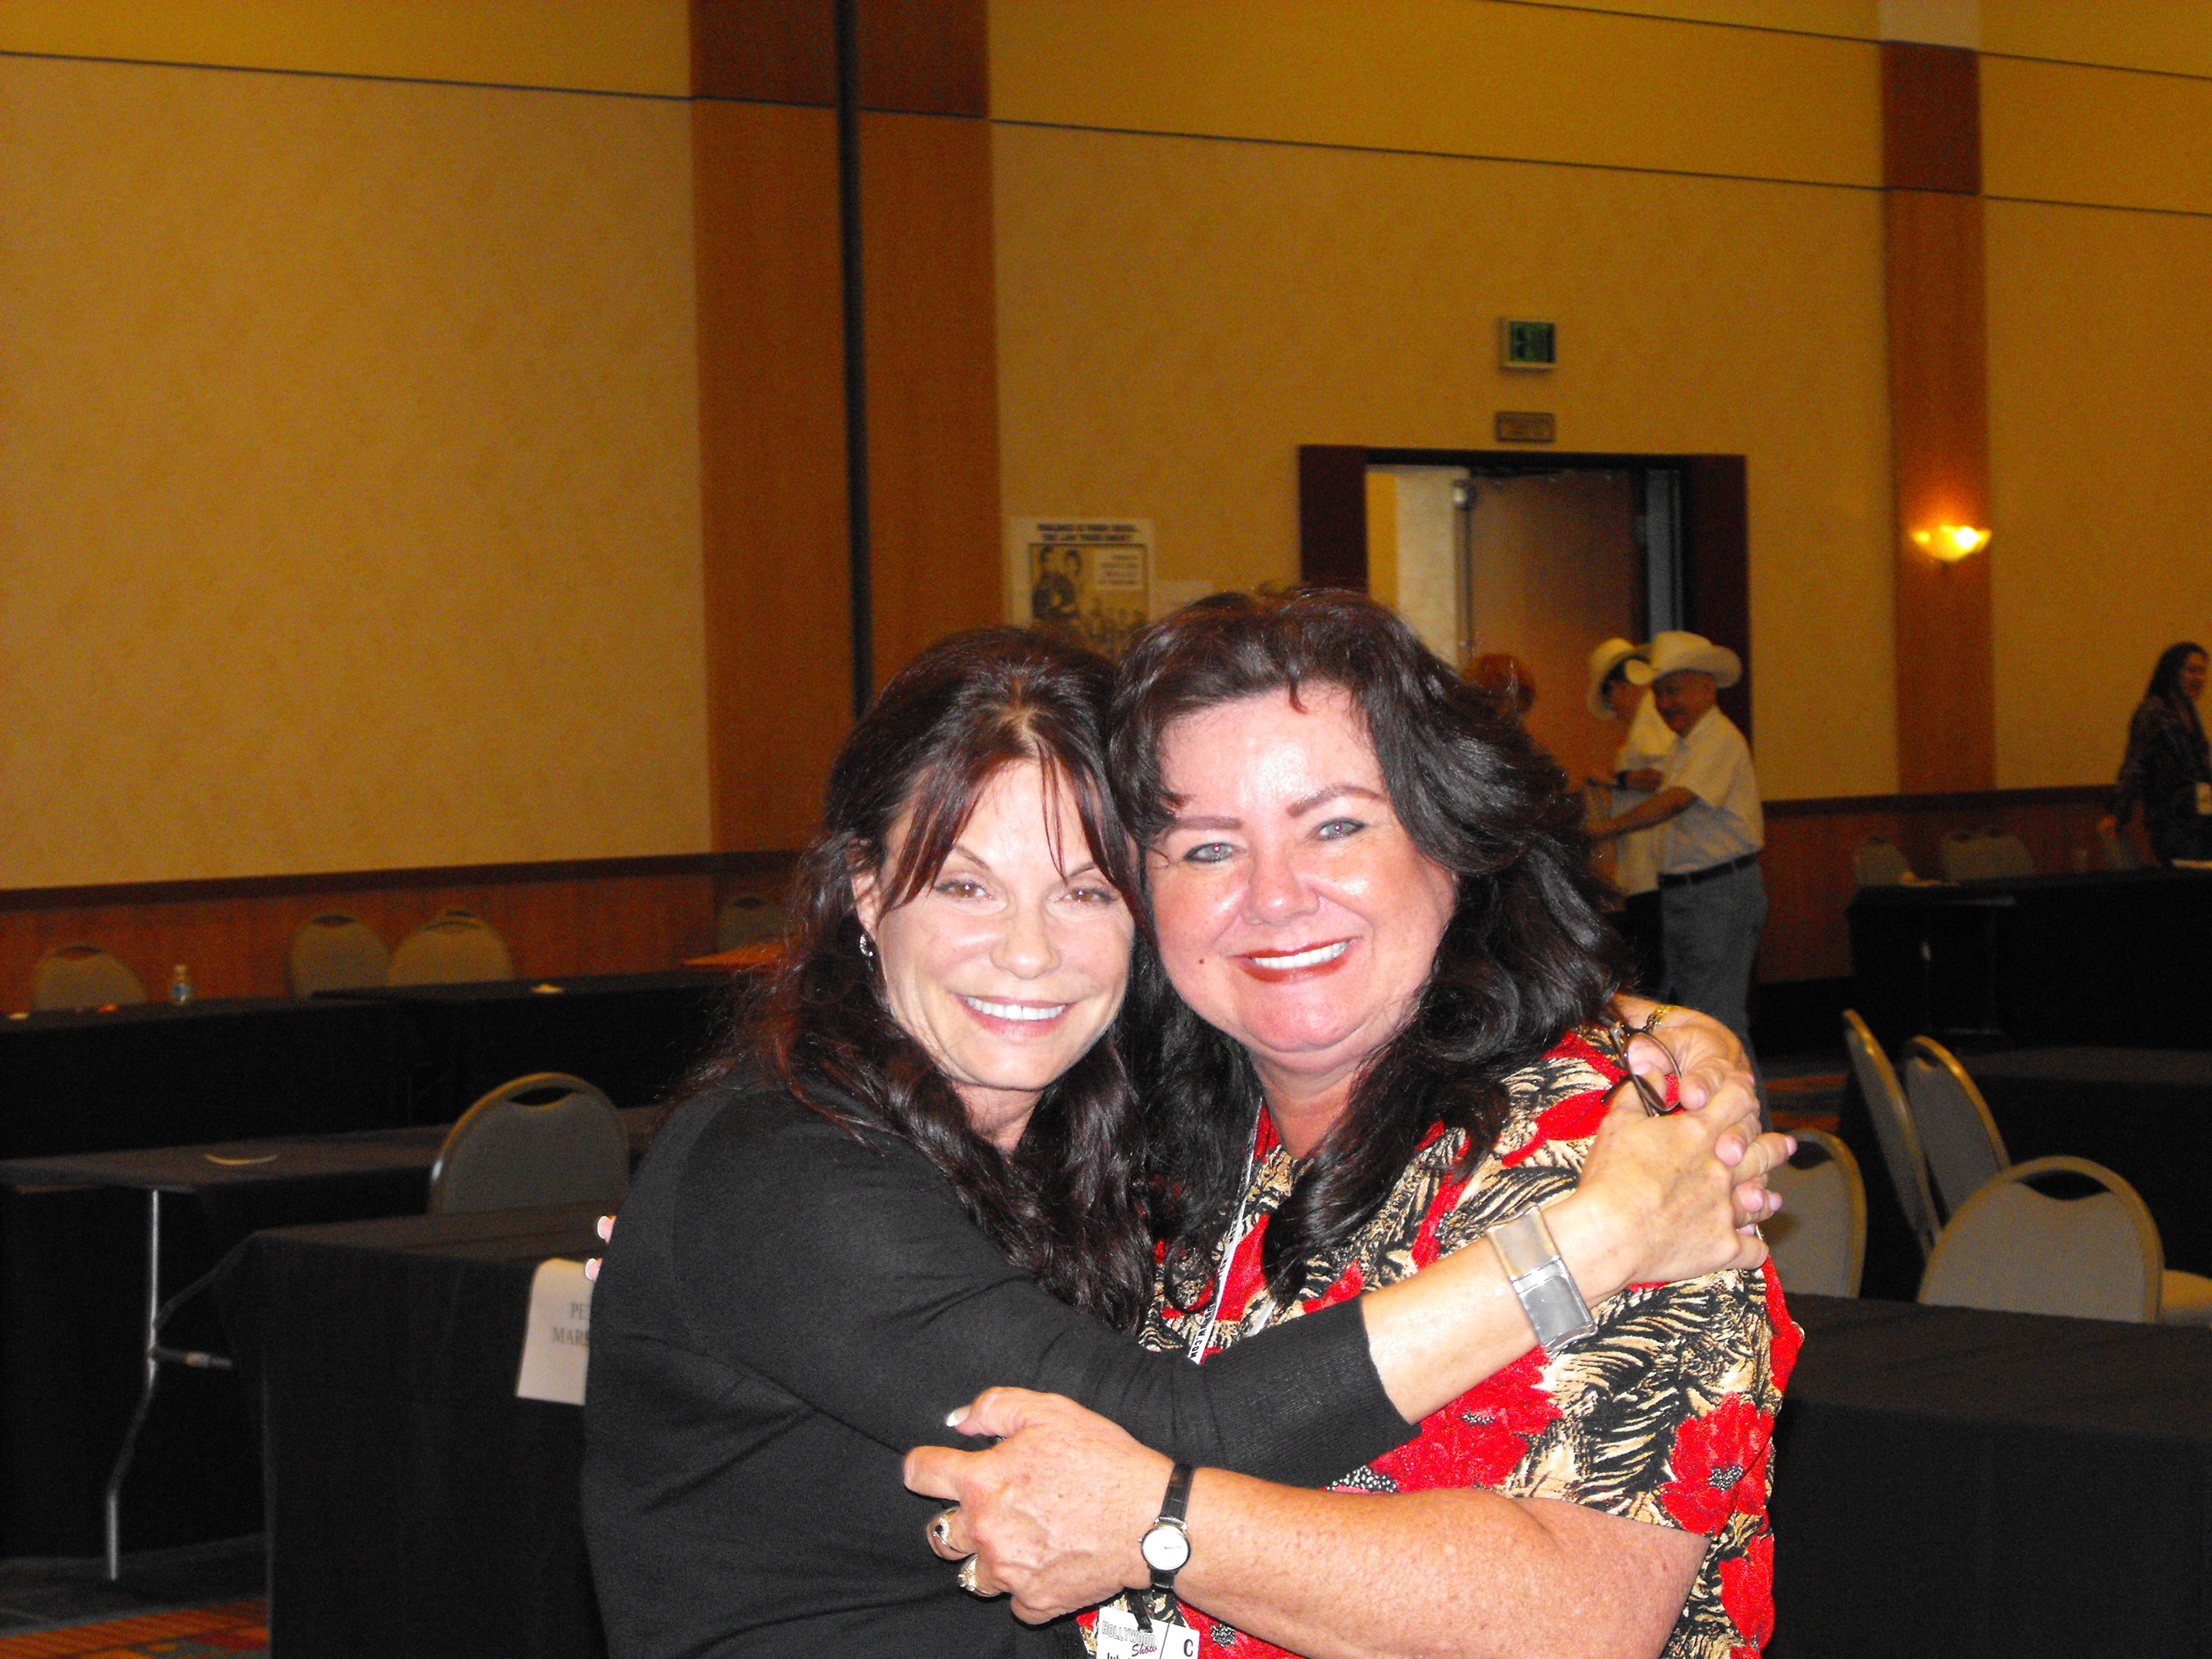 Kay Lenz and I